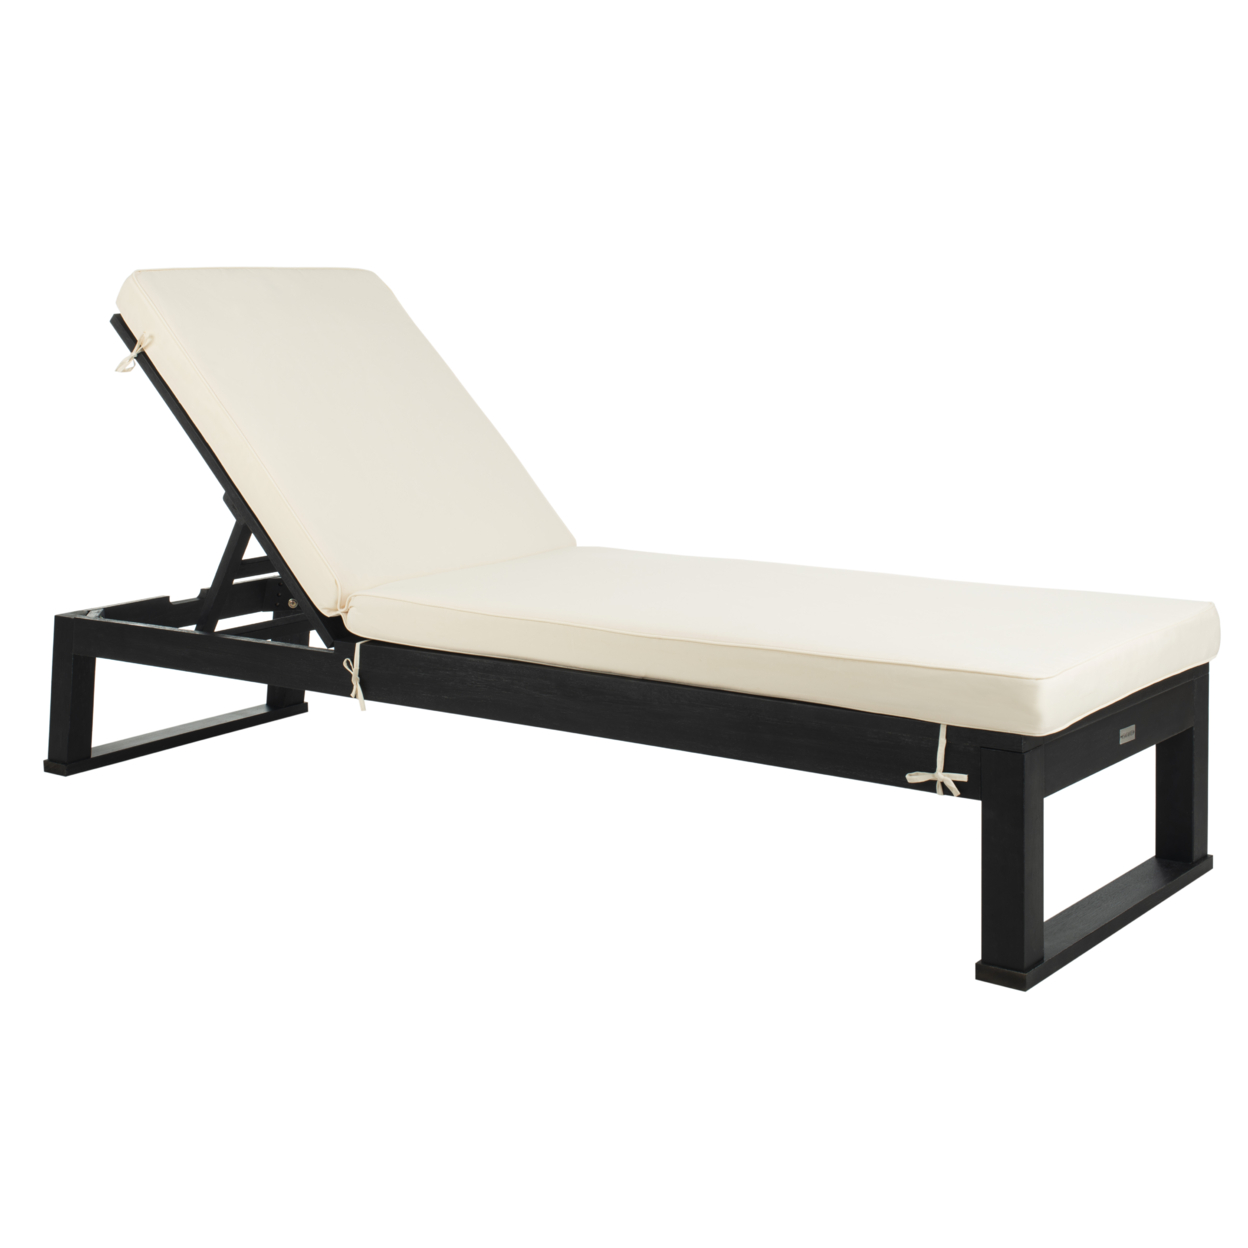 SAFAVIEH Outdoor Collection Solano Chaise Sunlounger Black/Beige